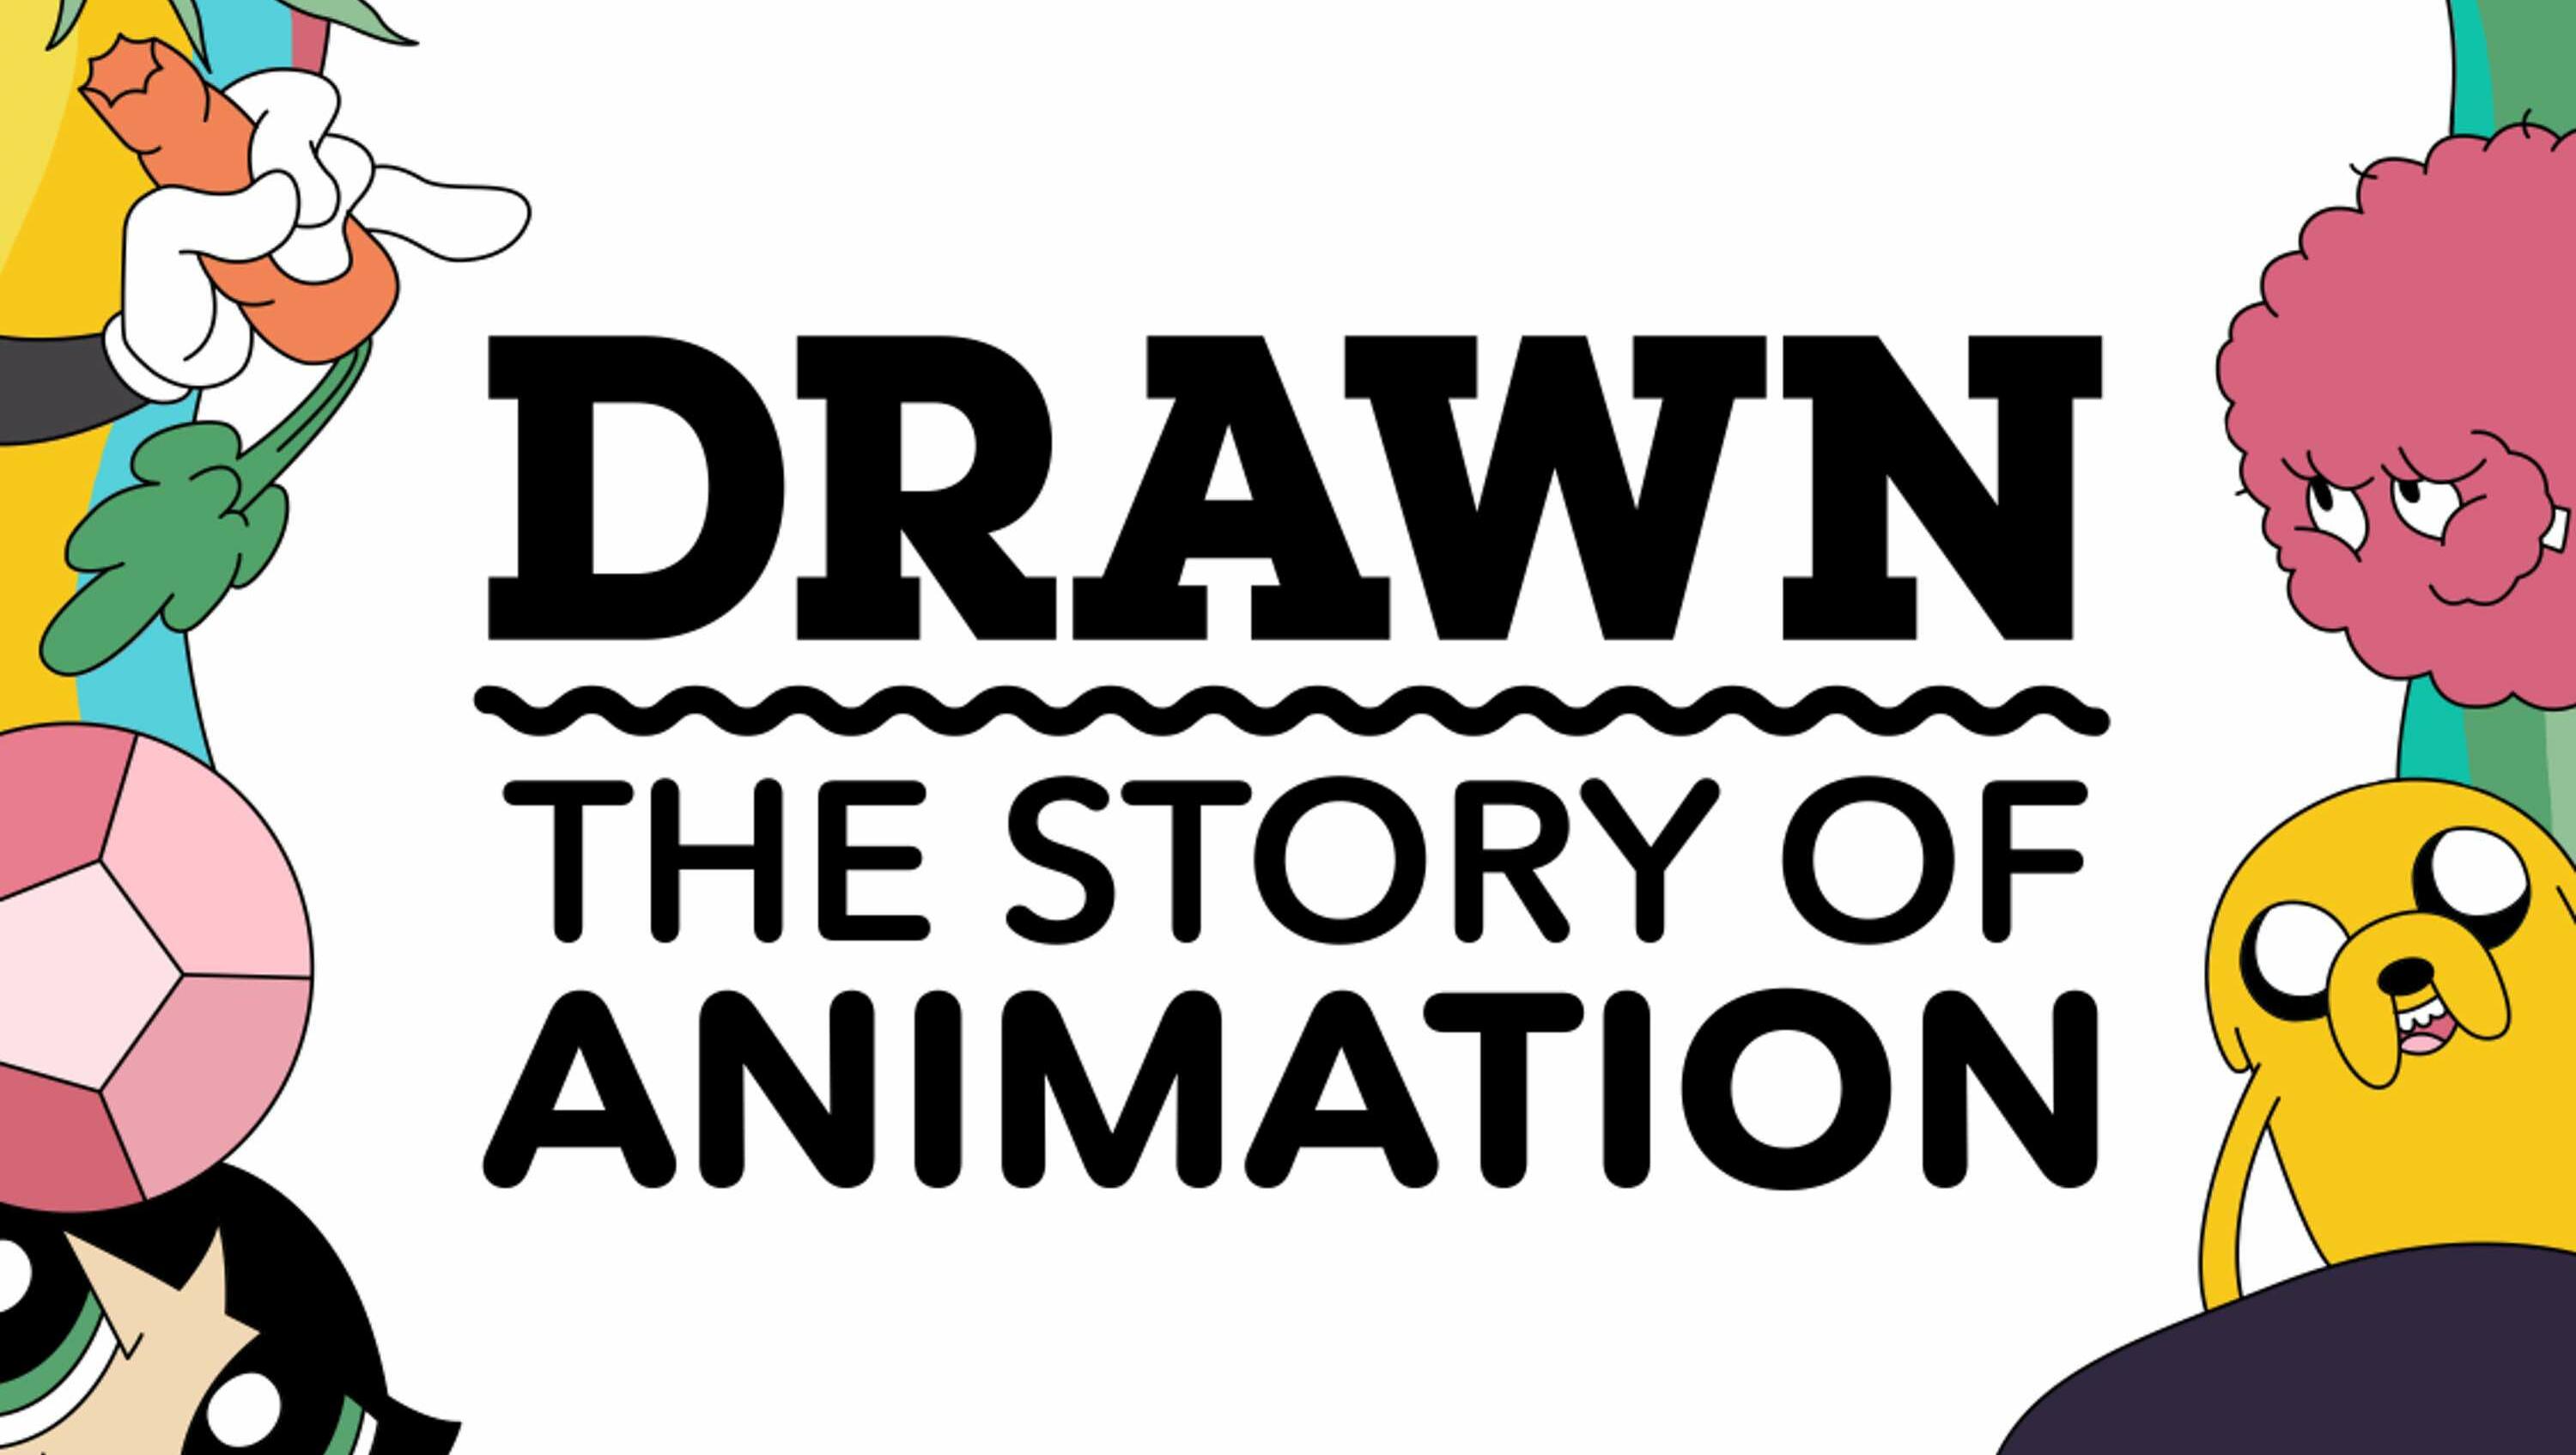 About Drawn